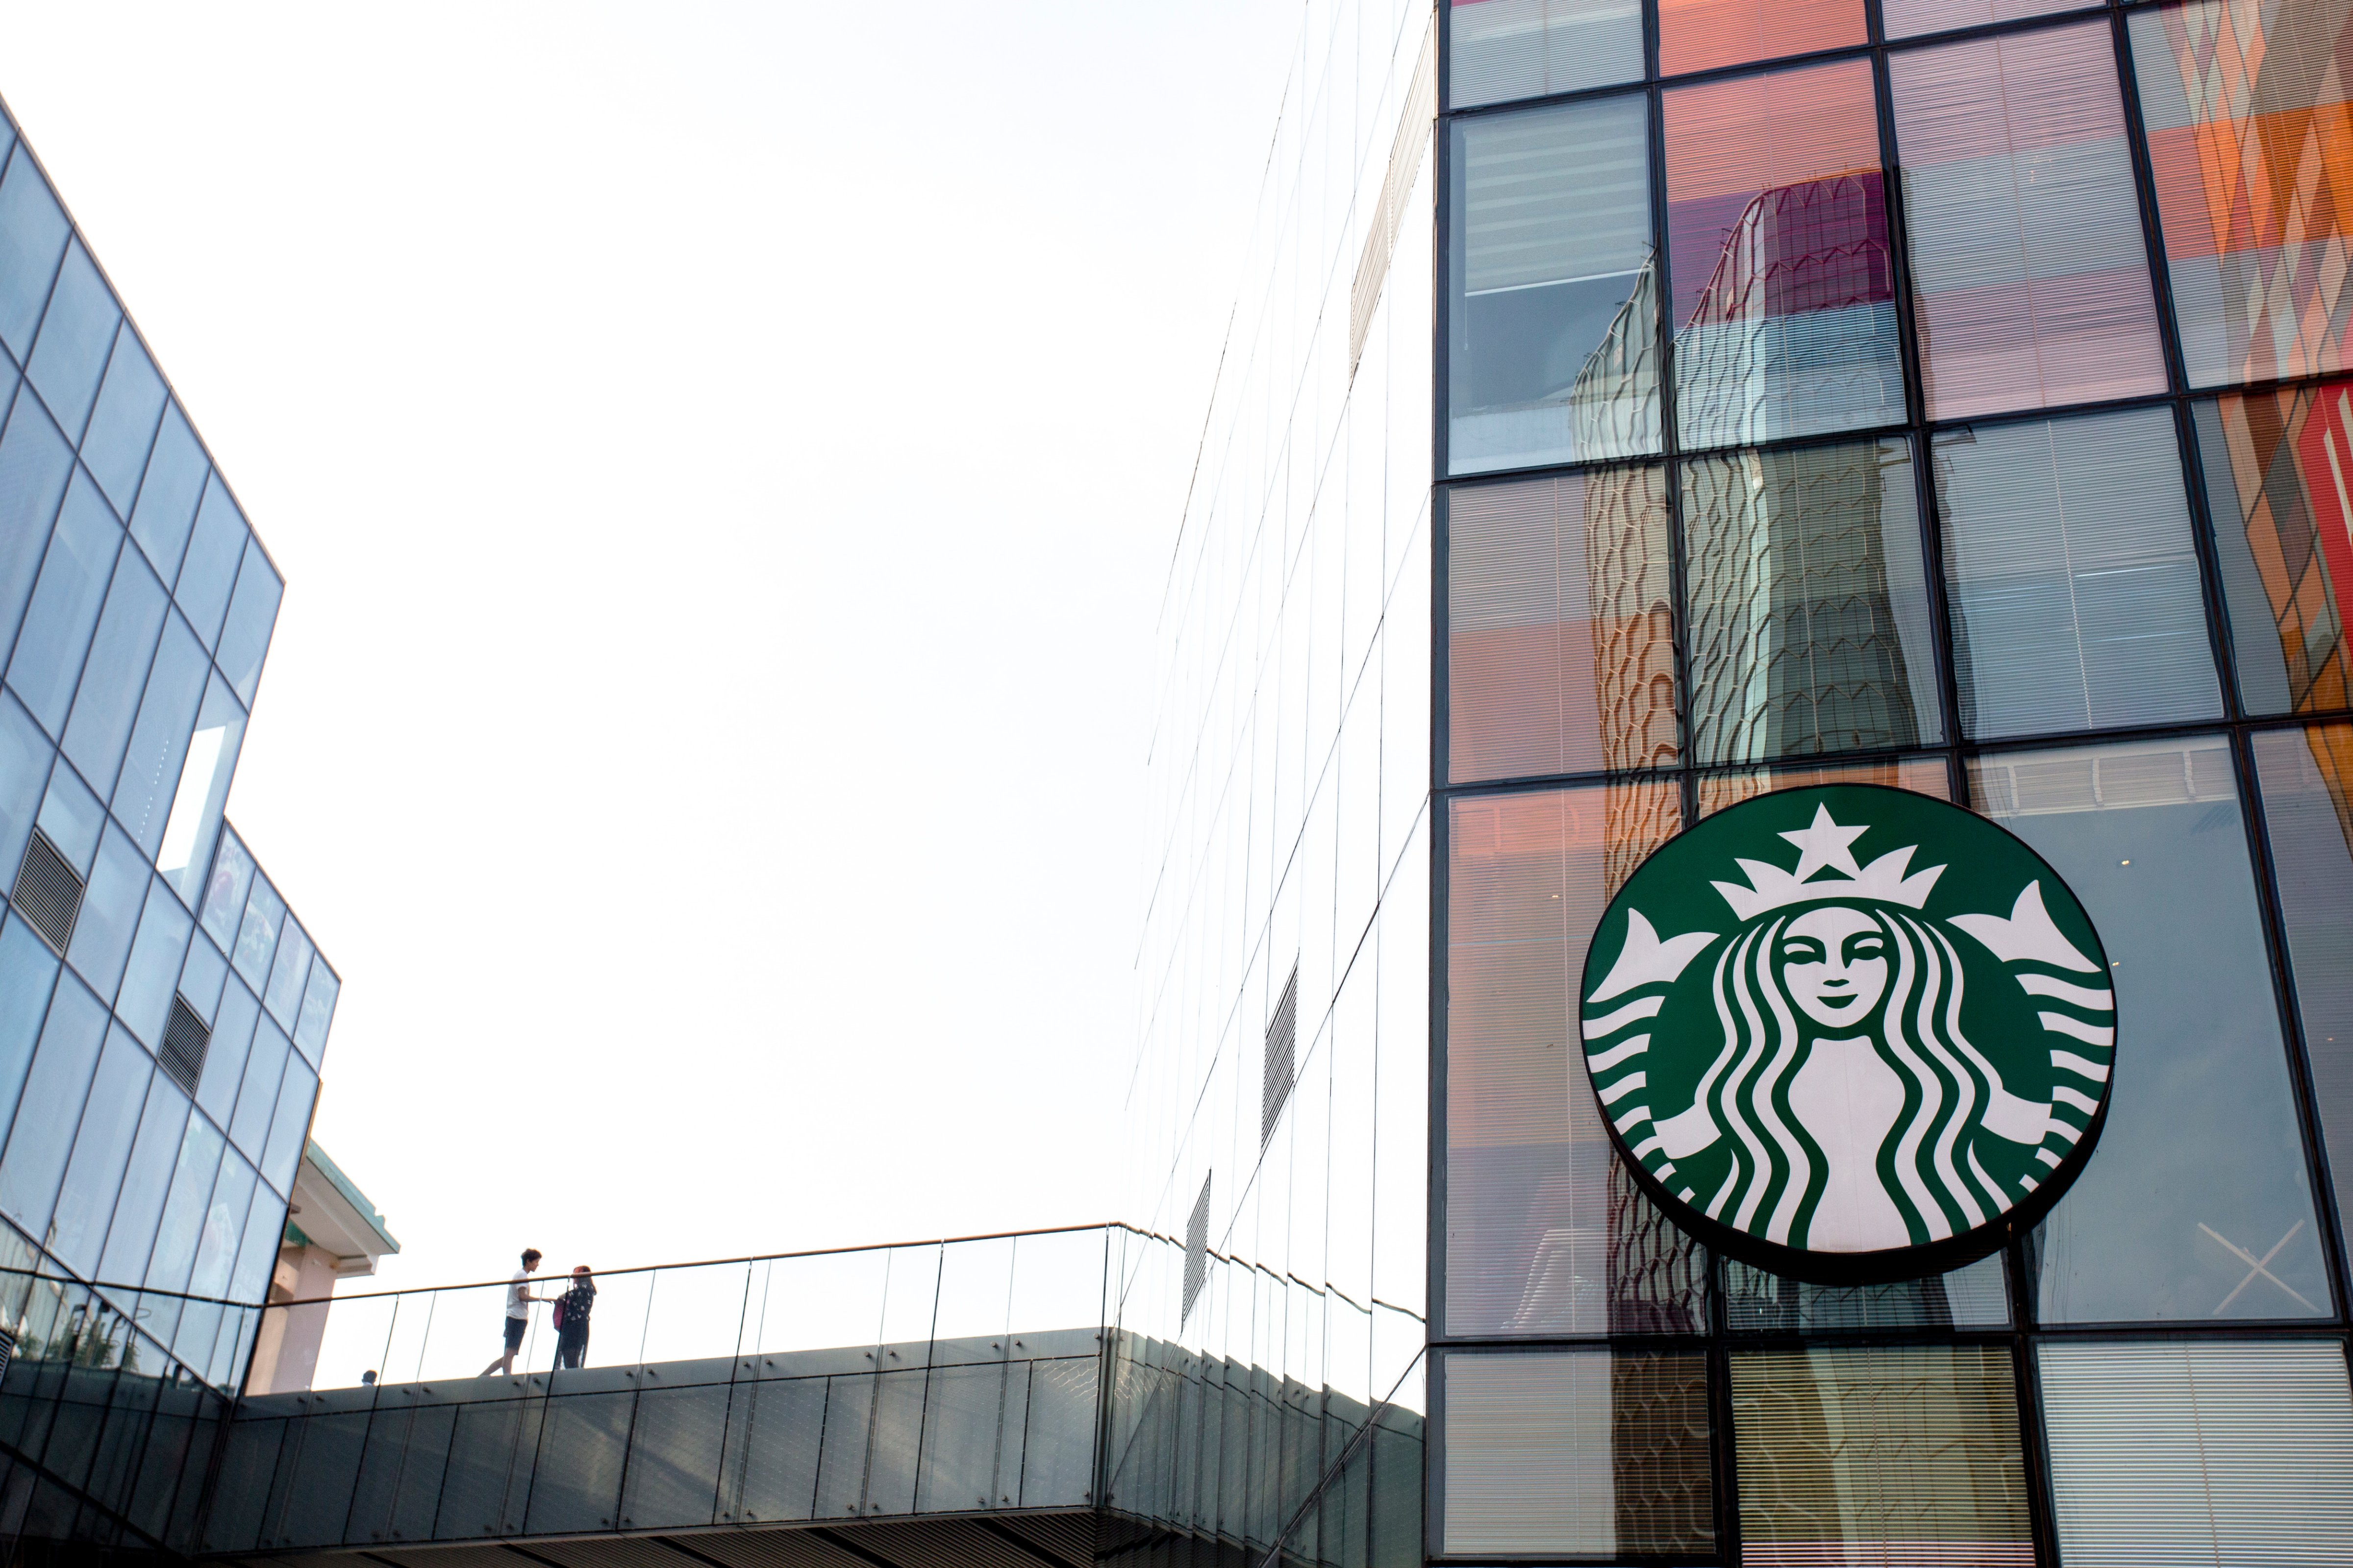 A Starbucks cafe in Sanlitun, China on Aug. 8, 2015. (Zhang Peng—LightRocket/Getty Images)